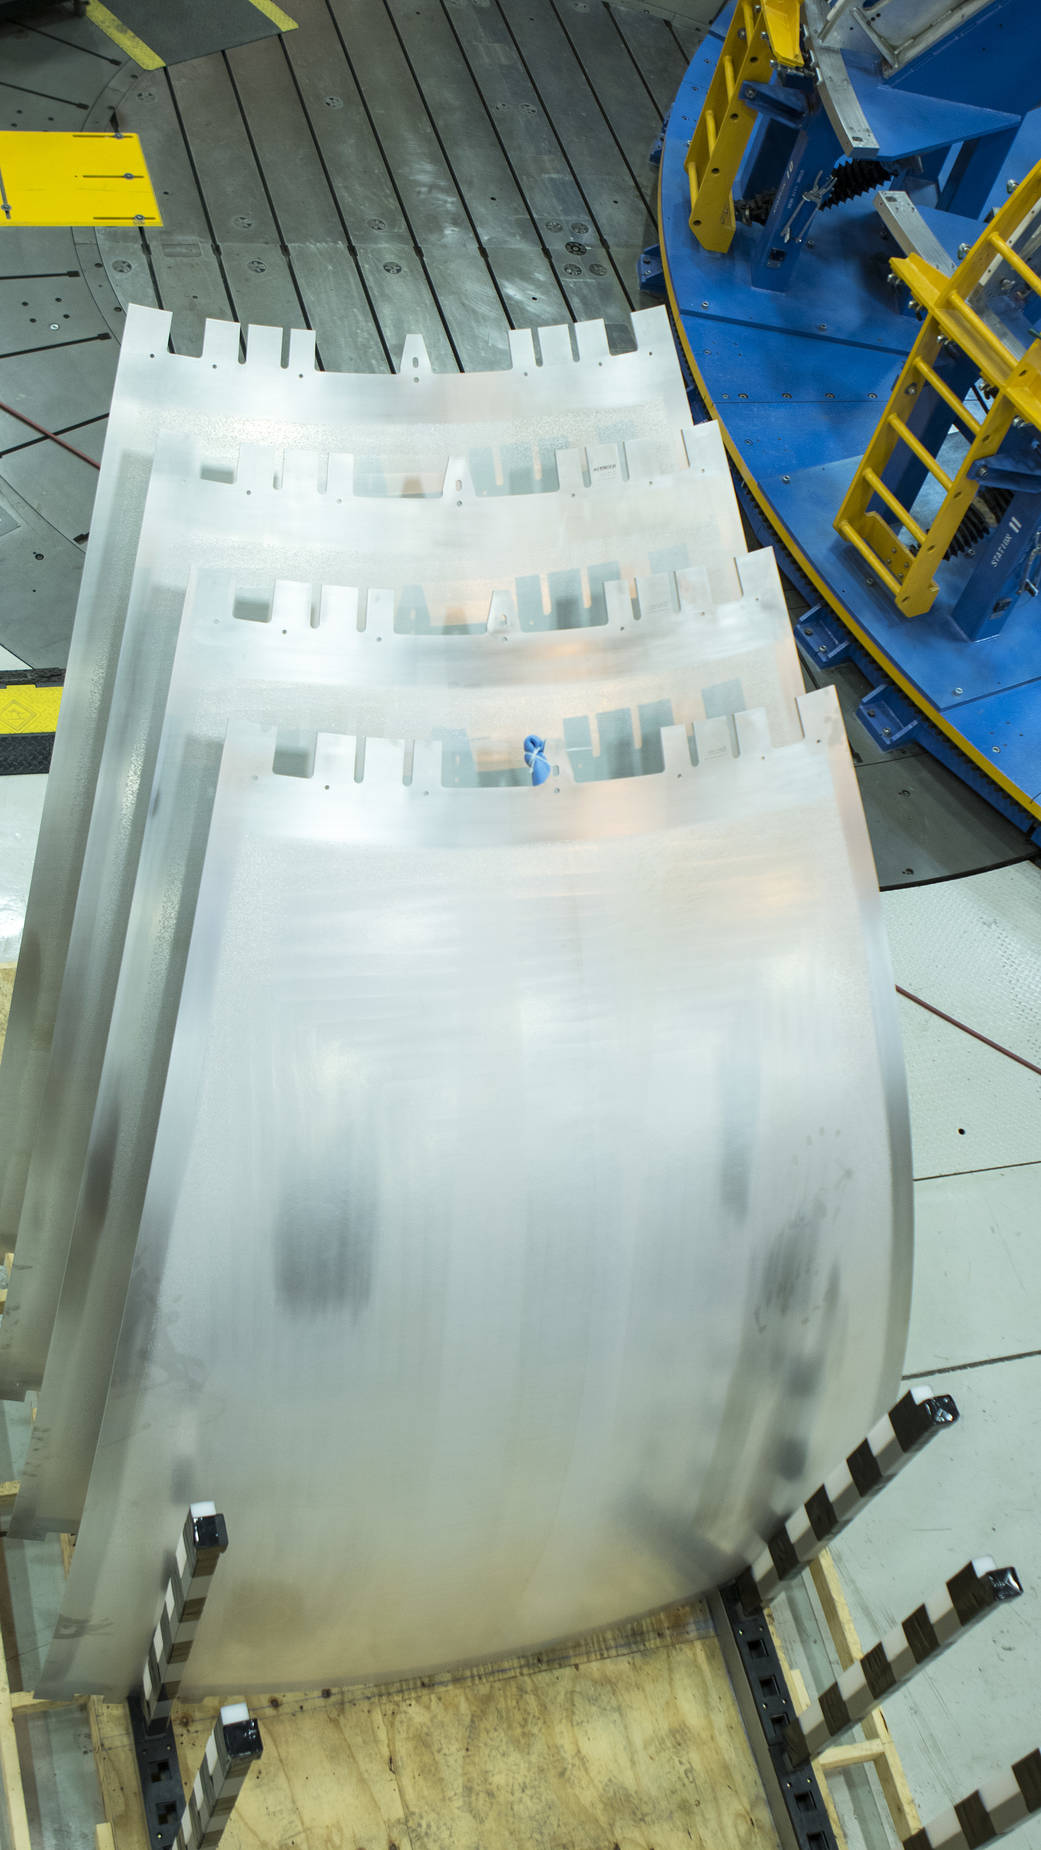 Aluminum gore panels stacked in a manufacturing area